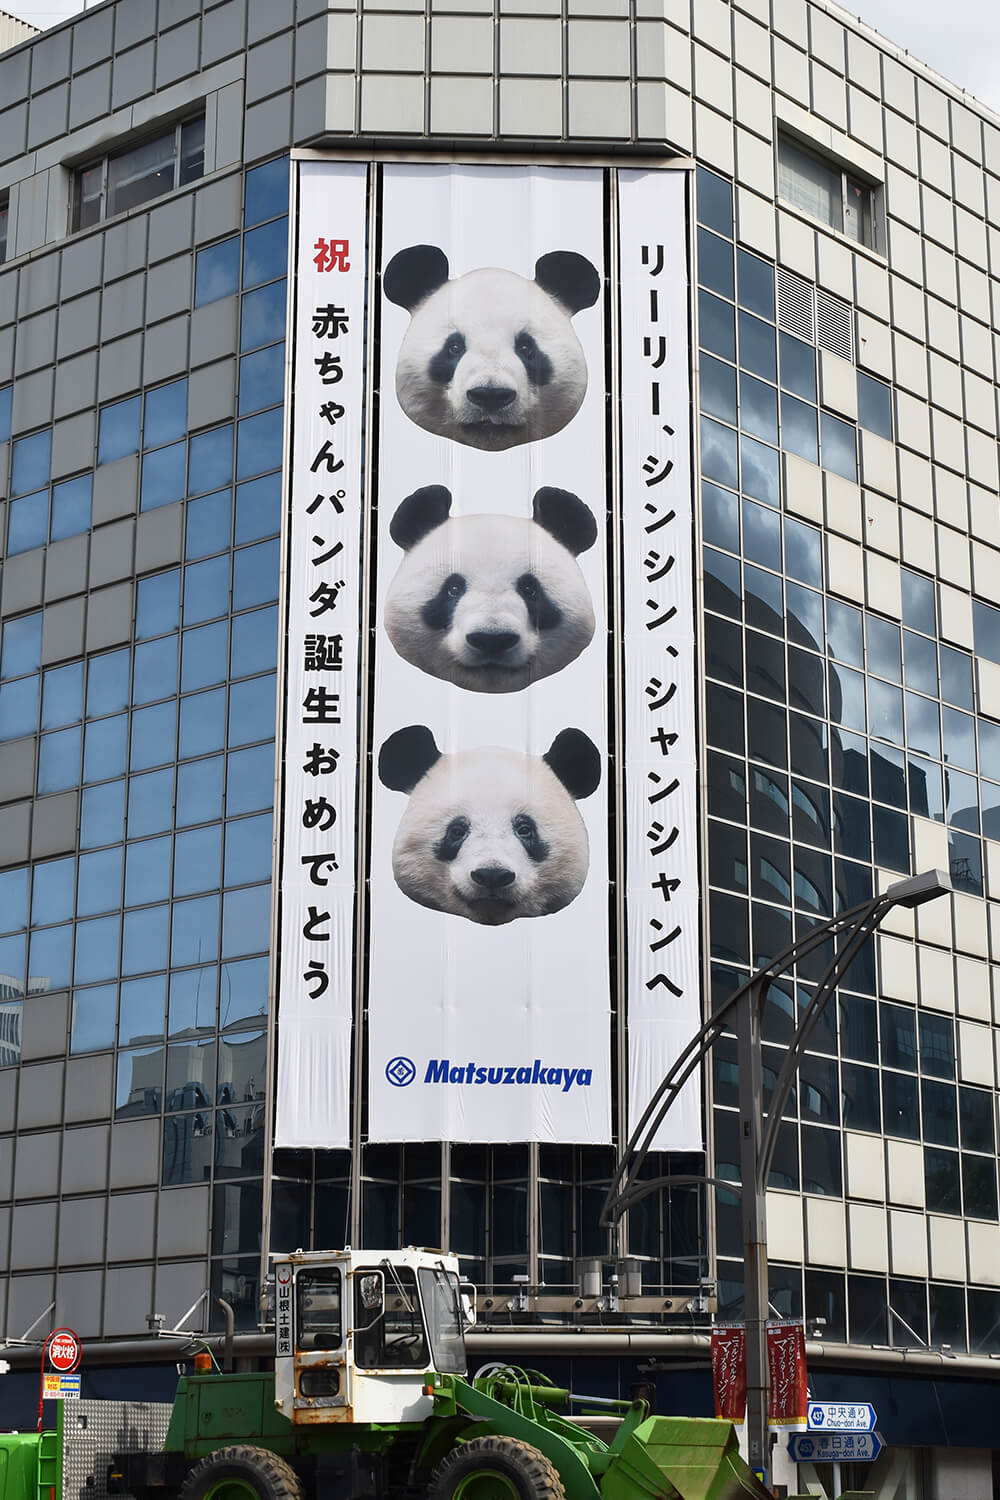 In June 2021, the younger siblings of "Xiangxiang" were born, and the panda family in Ueno became a family of five. The picture shows a huge congratulatory poster outside the Ueno Matsuzakaya Department Store building. Gao's Guibo Picture